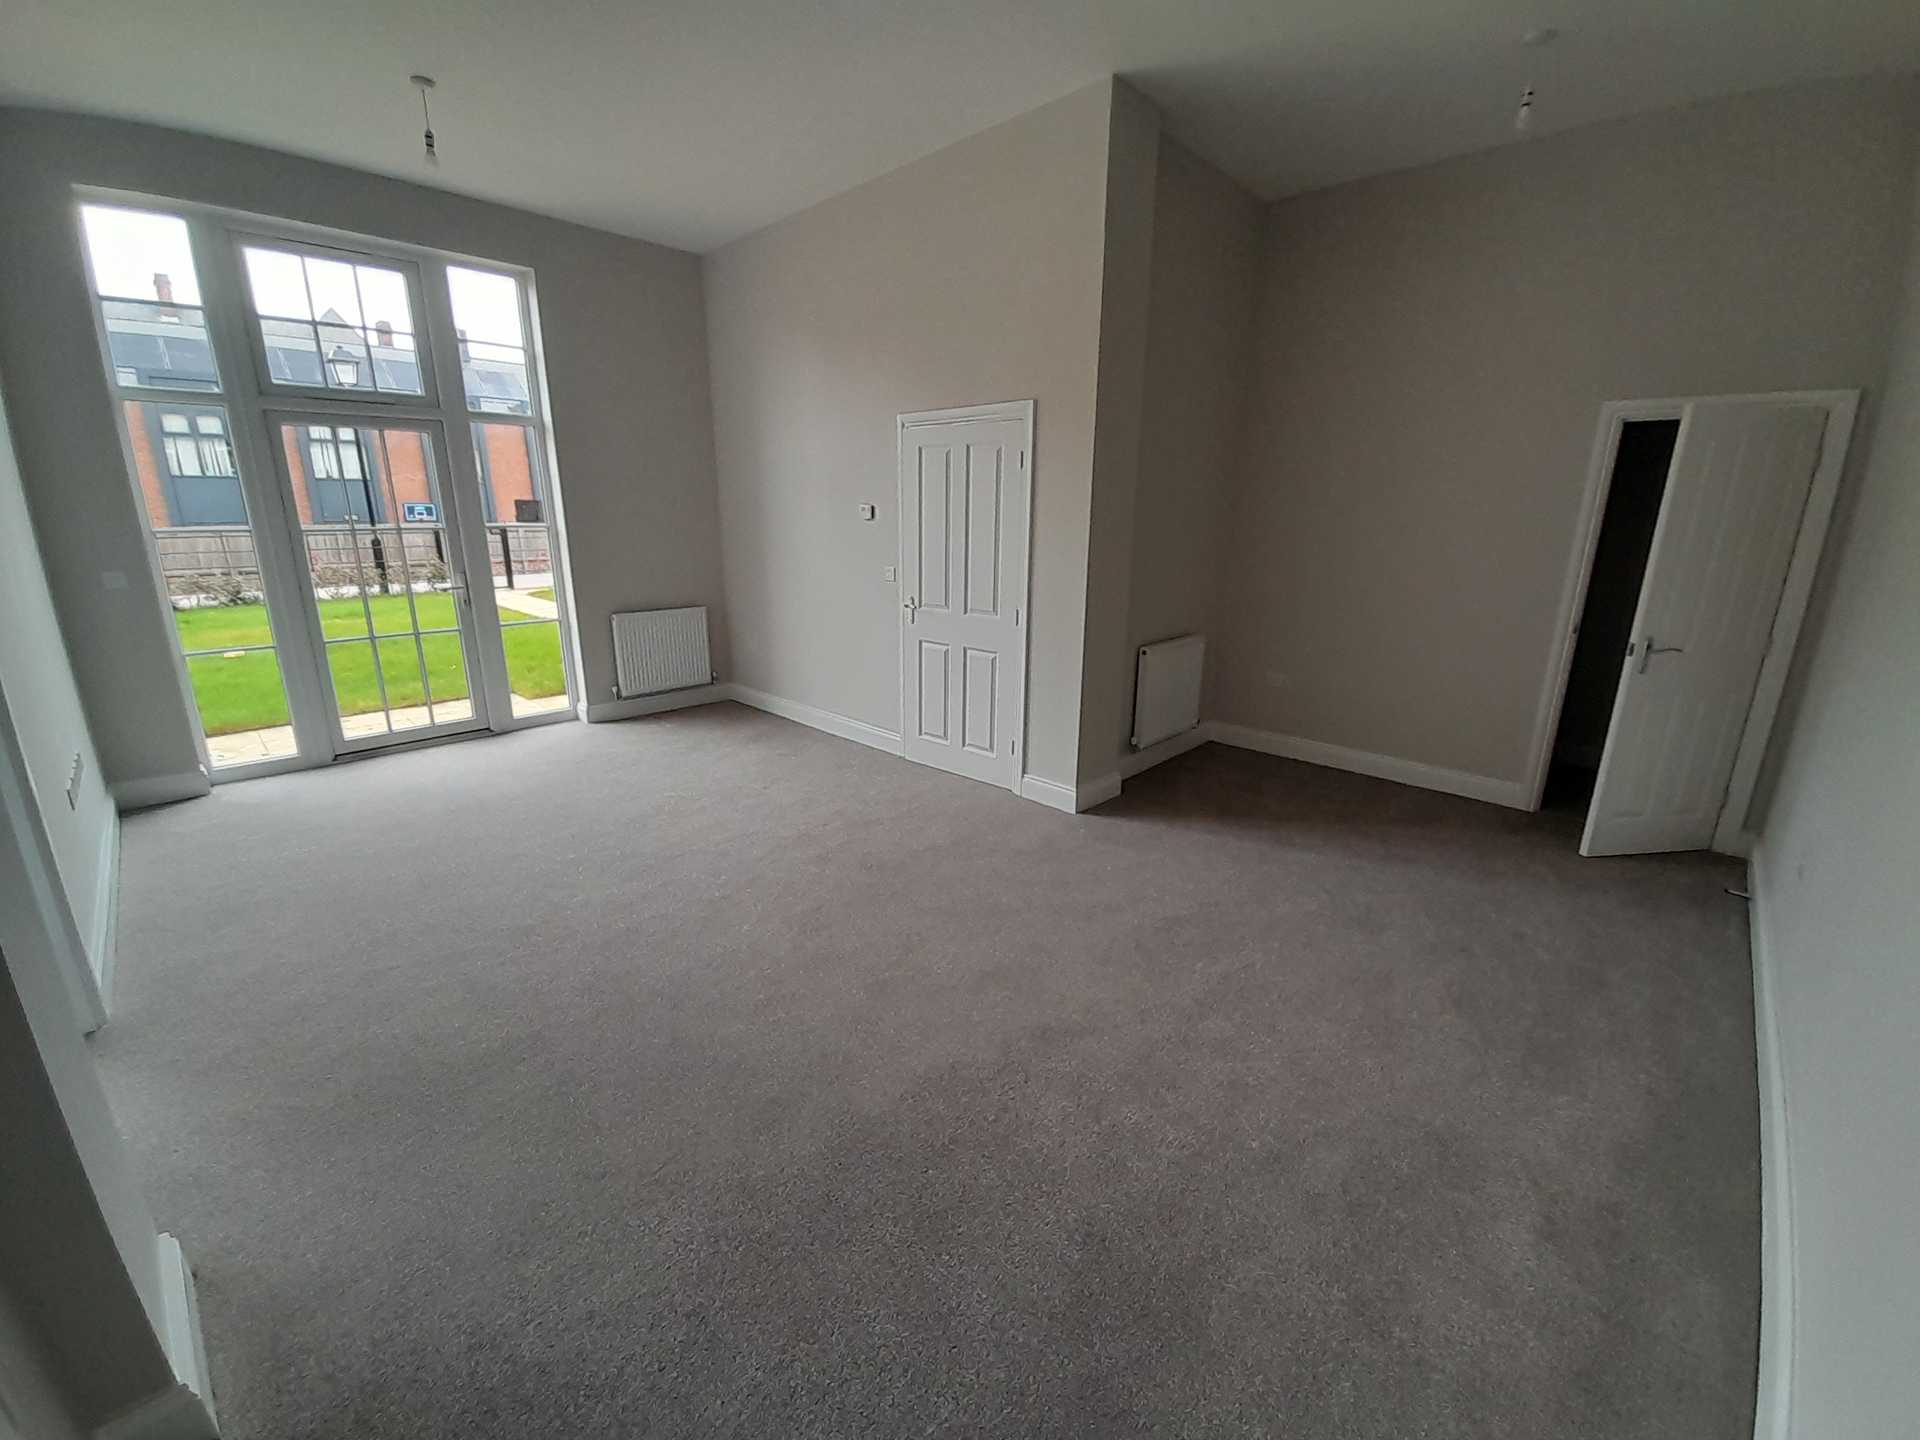 House in Humberstone, Leicester 11723165